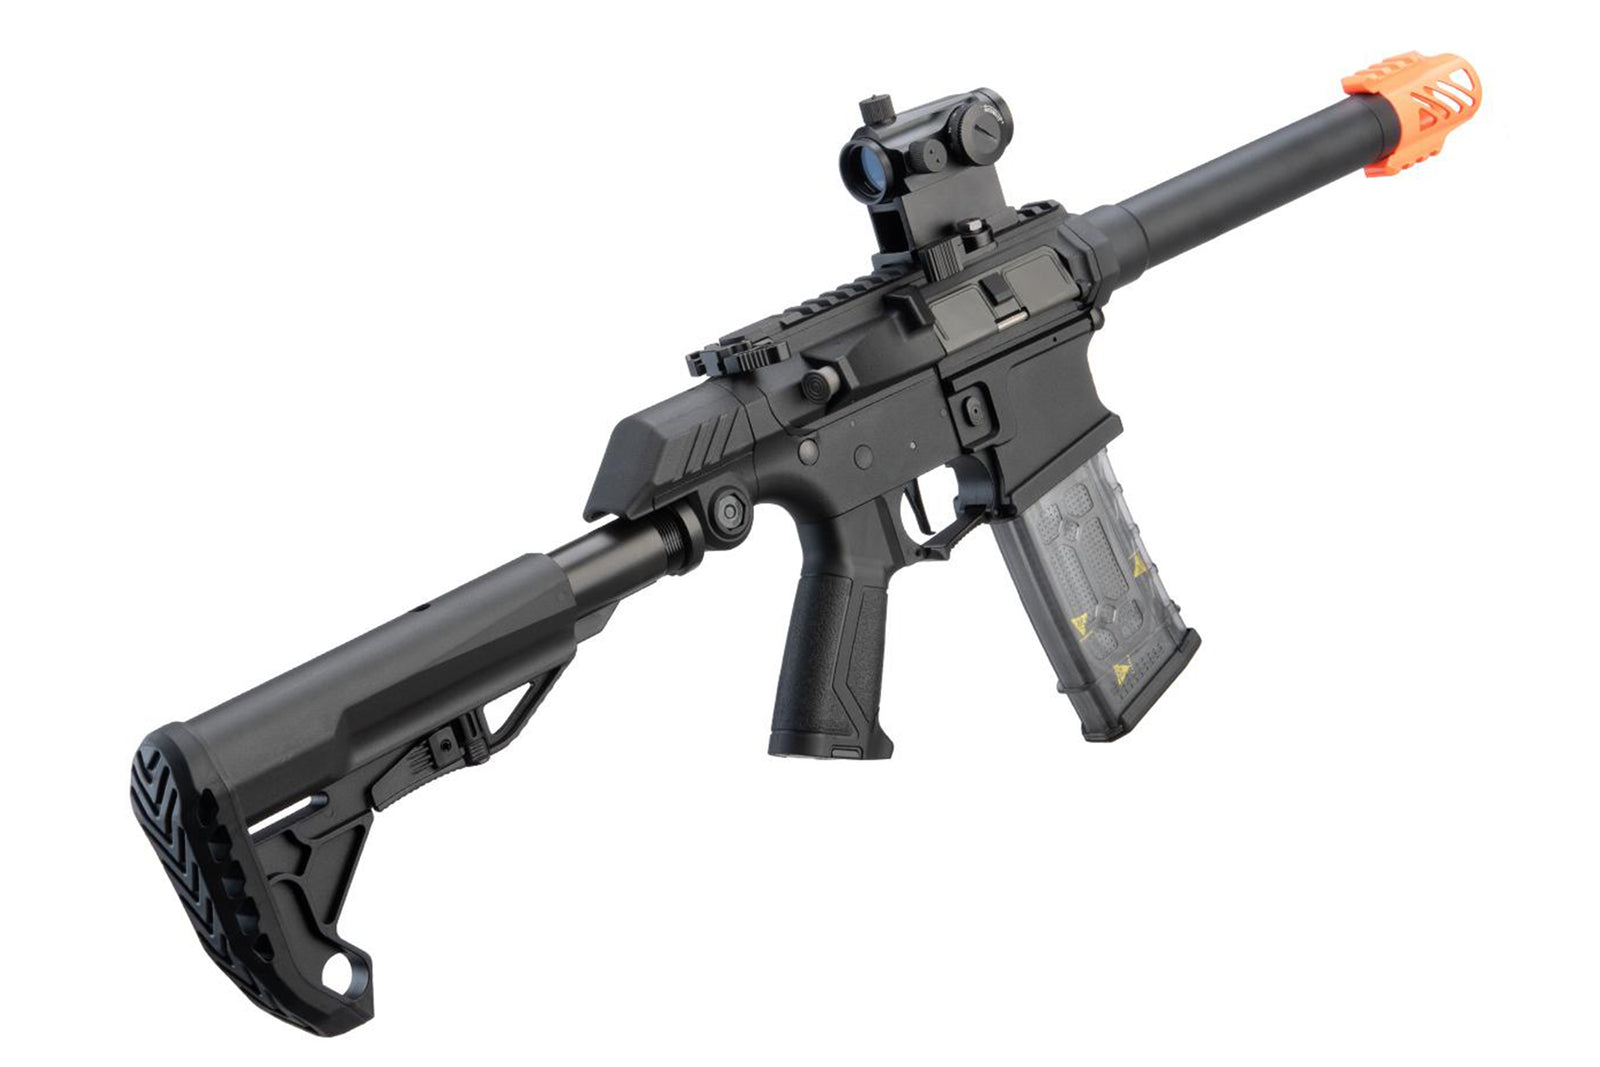 G&G SSG-1 USR Airsoft AEG Rifle w/ Variable Angle Stock and ETU MOSFET